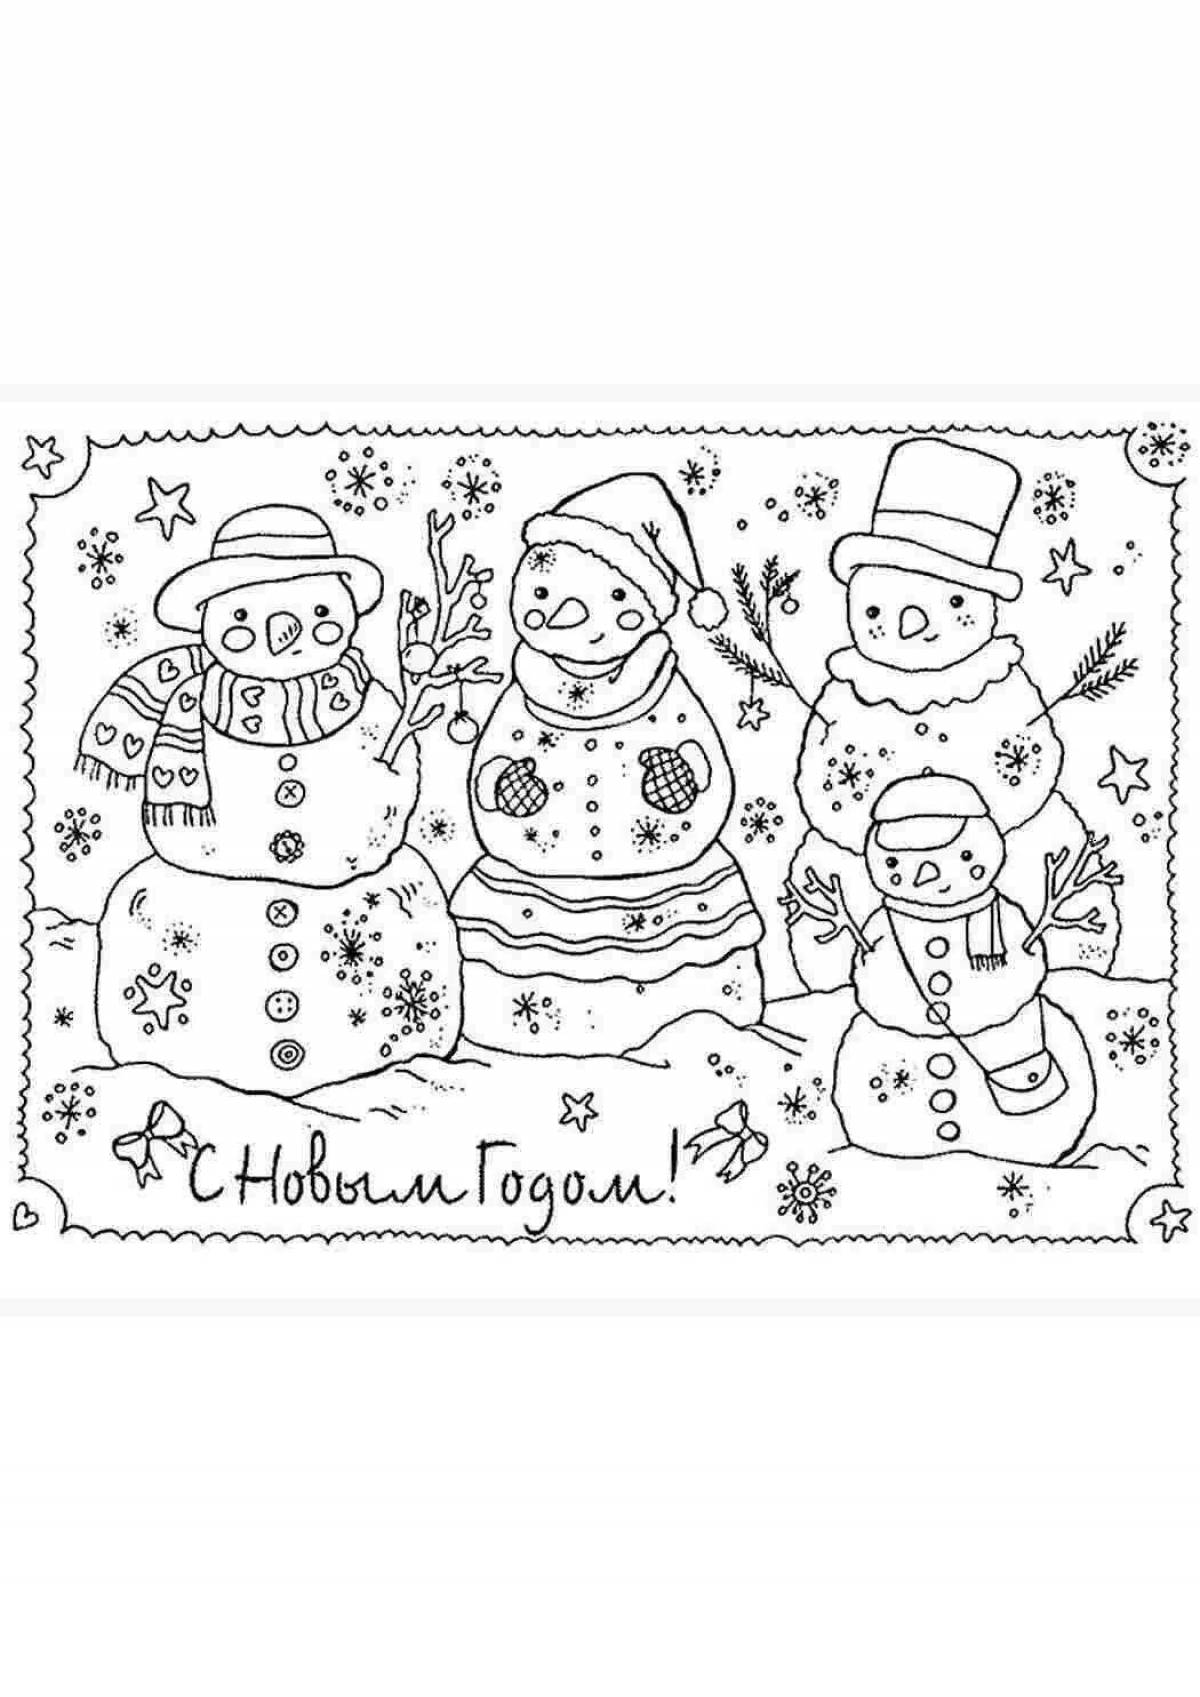 Glossy snowman family coloring book